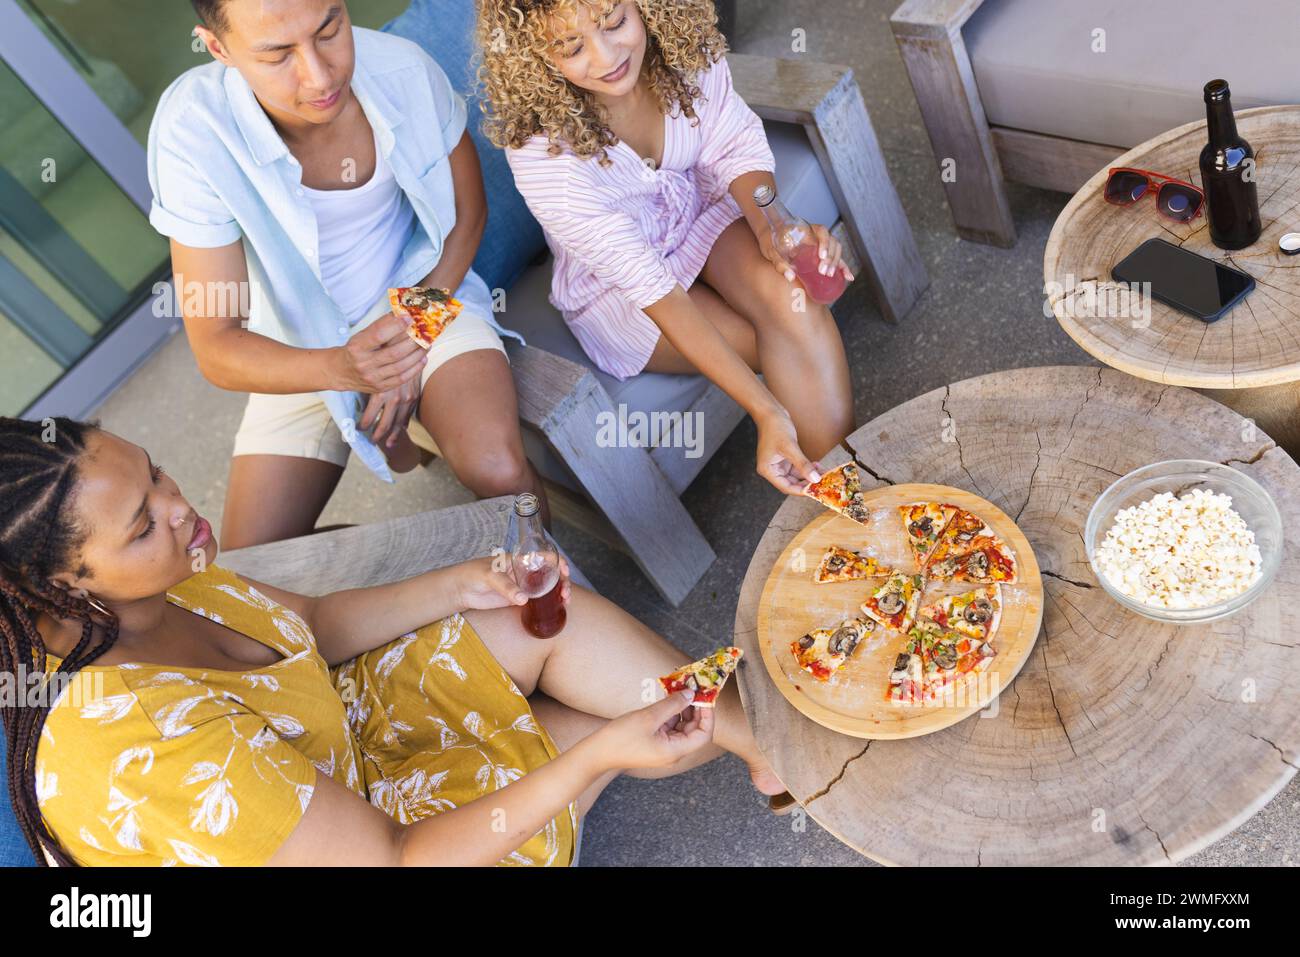 Diverse friends enjoy a casual outdoor meal together, eating pizza Stock Photo